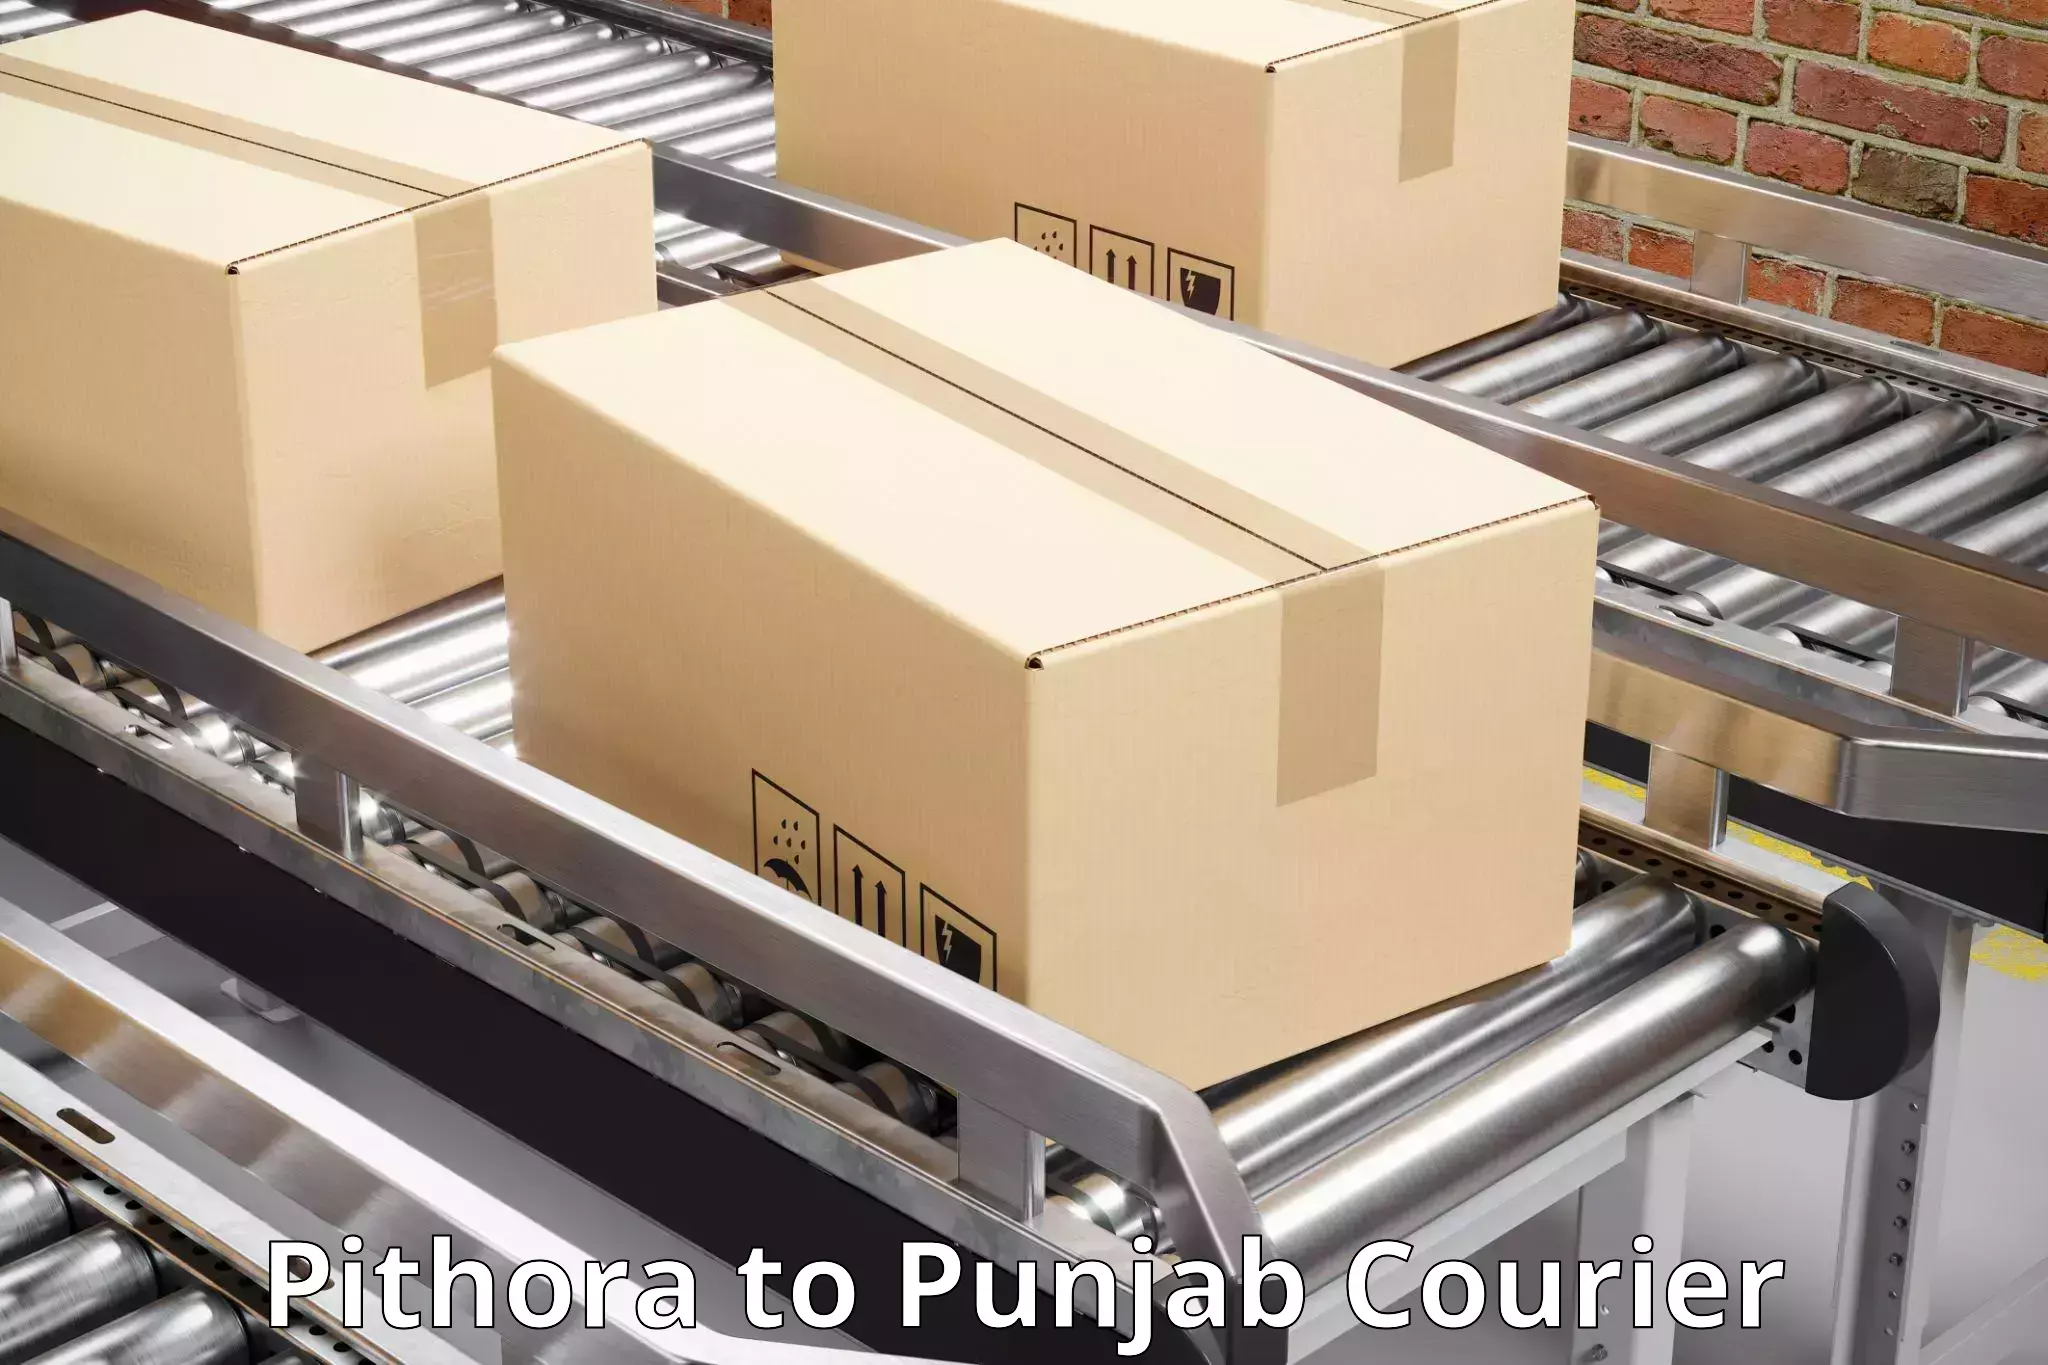 Express delivery capabilities Pithora to Zirakpur